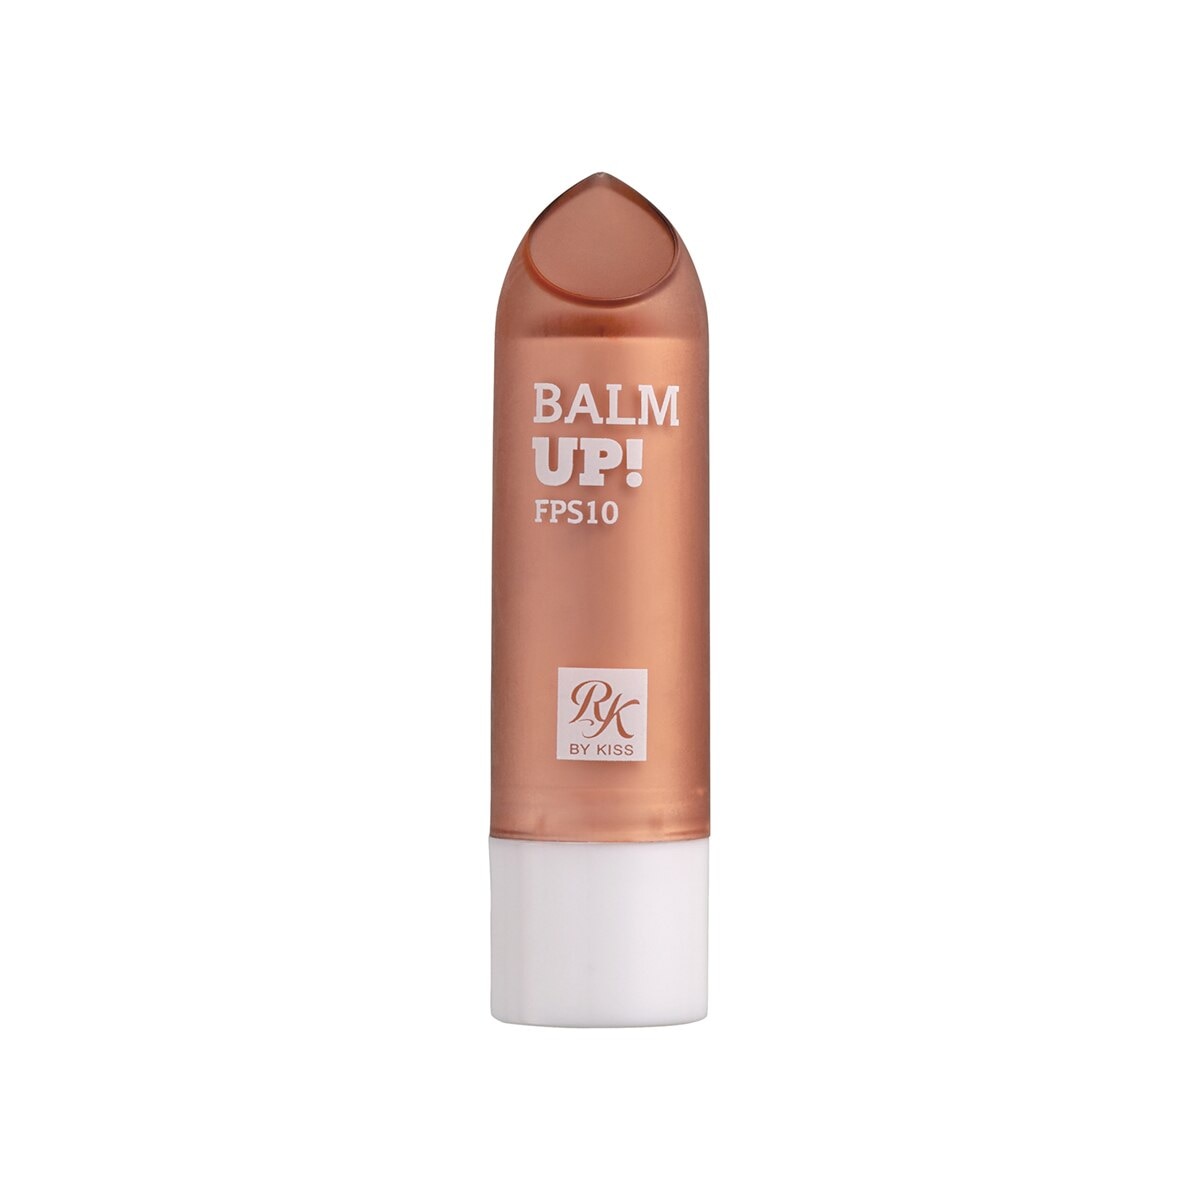 Protetor Labial Balm Up! RK by Kiss Look Up FPS10 Cor 05 4g